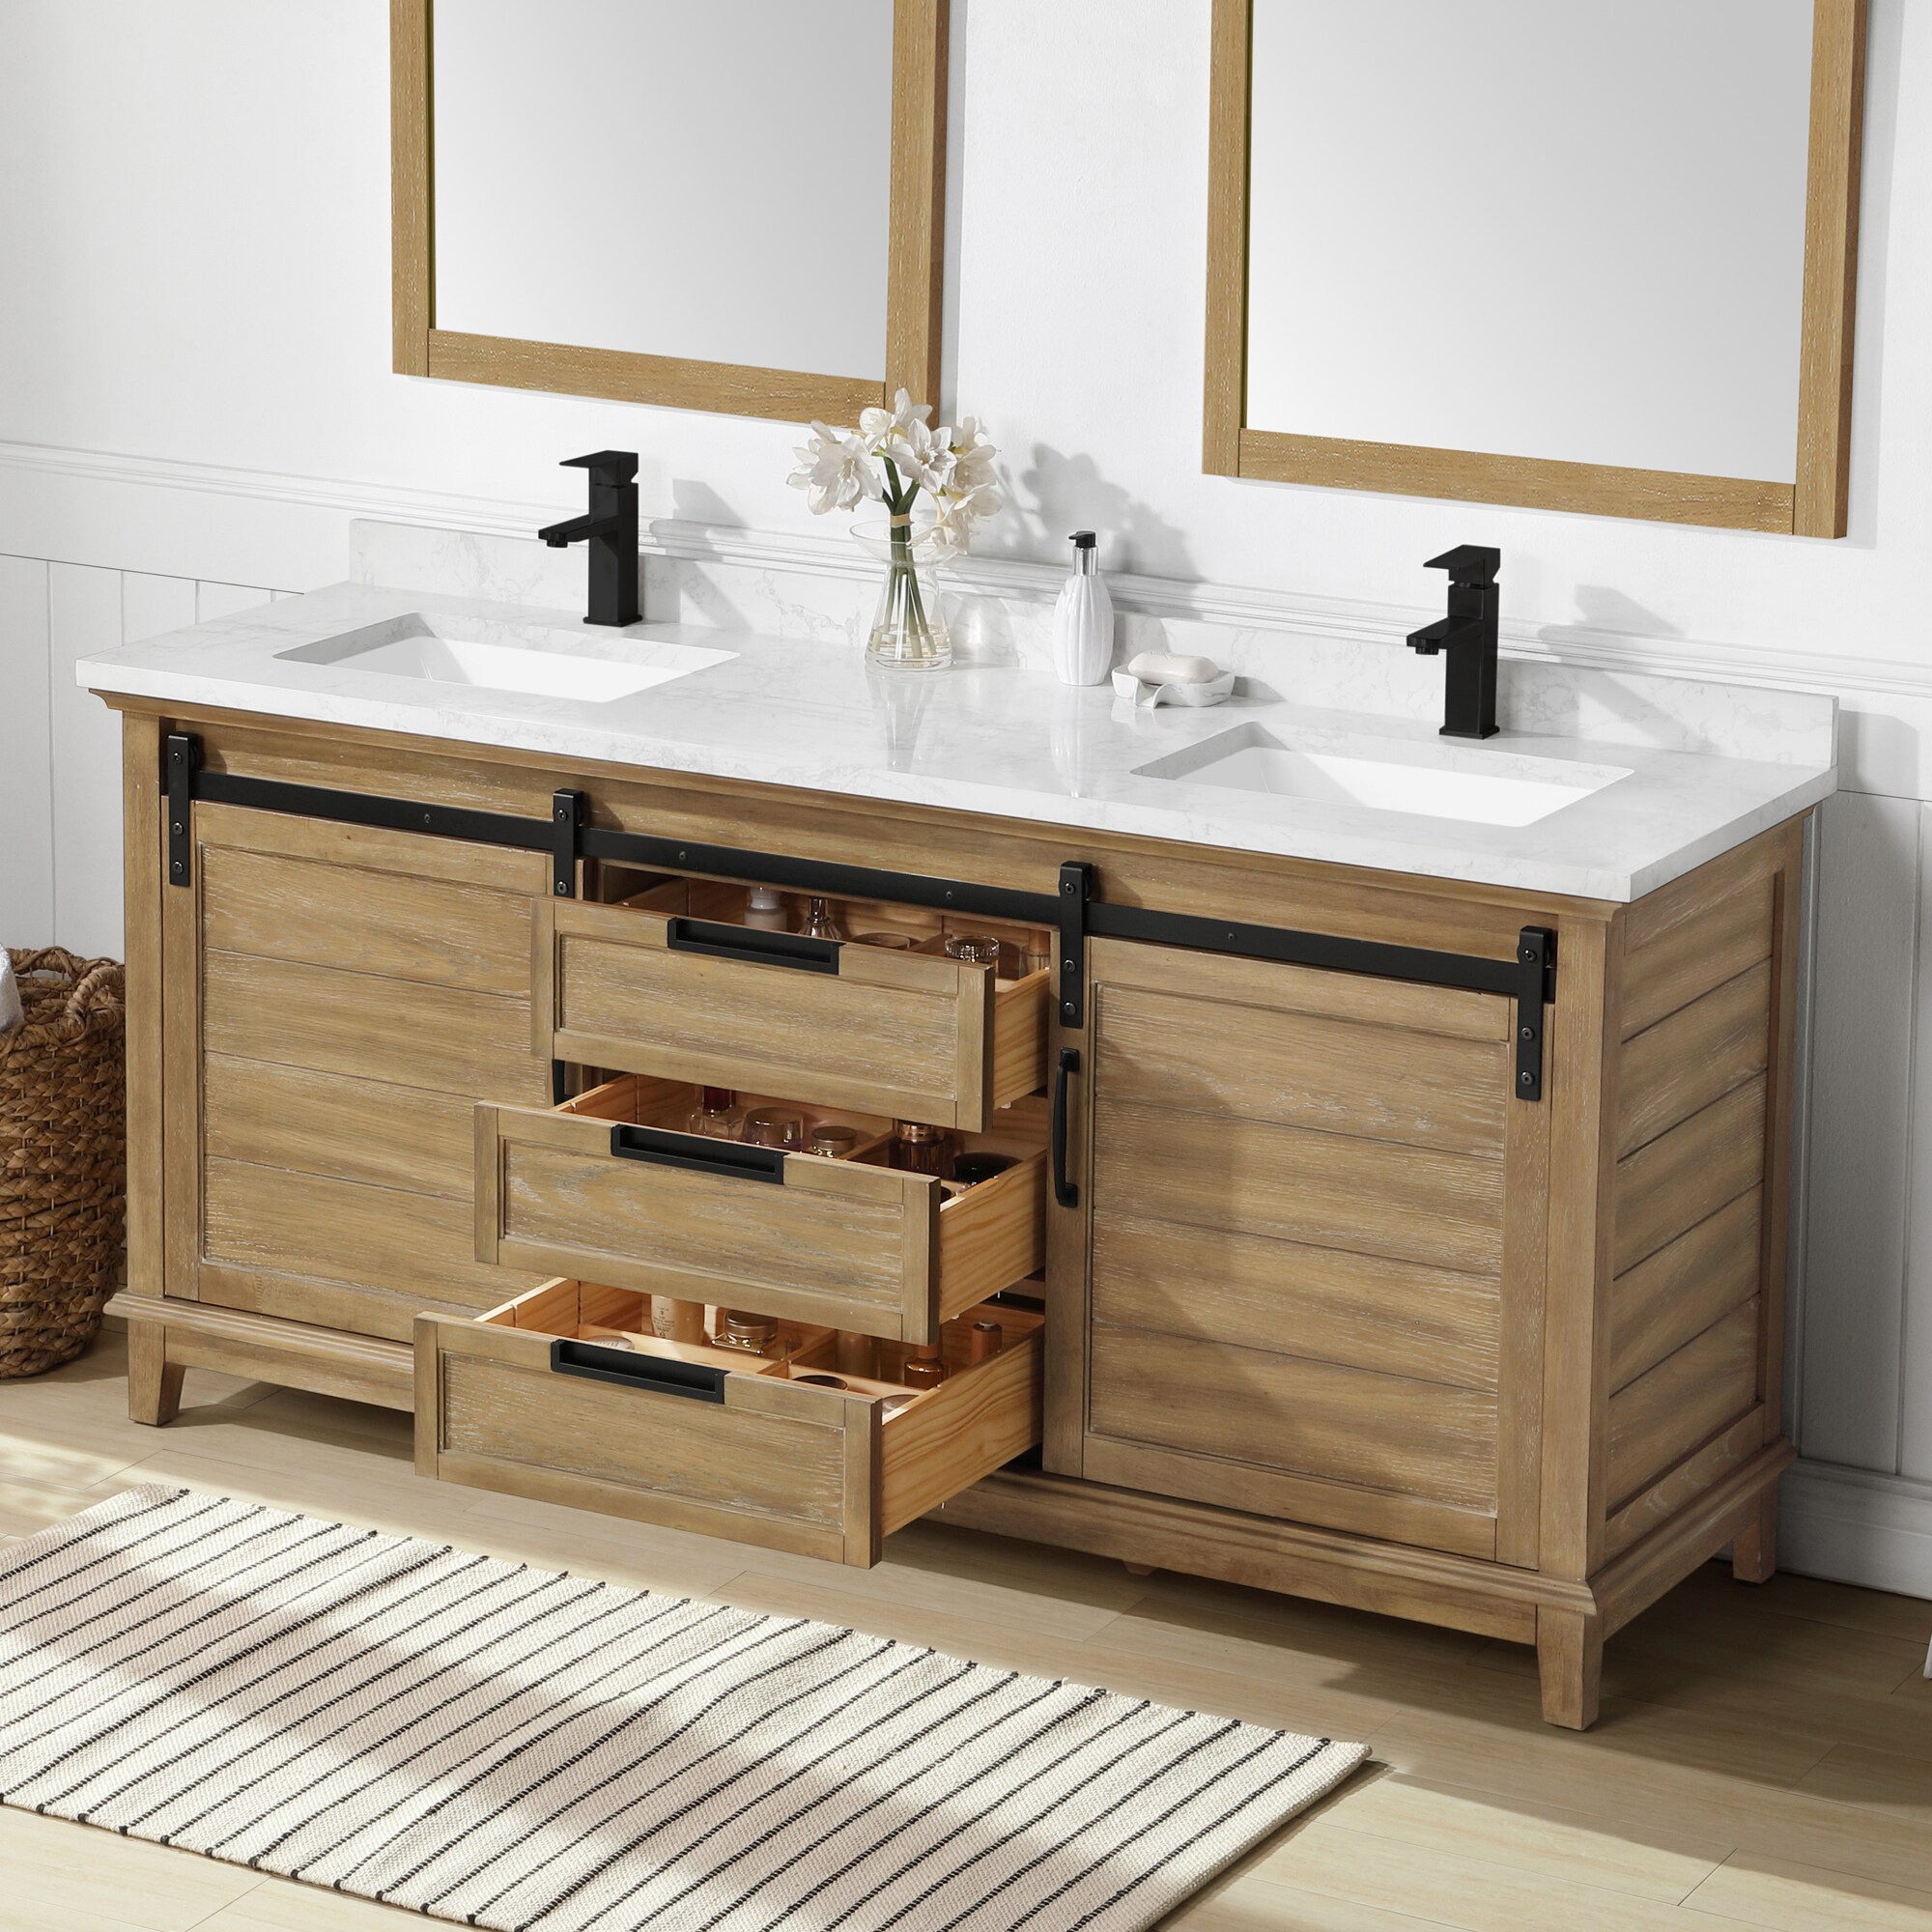 OVE Decors Edenderry 72-in Rustic Almond Undermount Double Sink ...